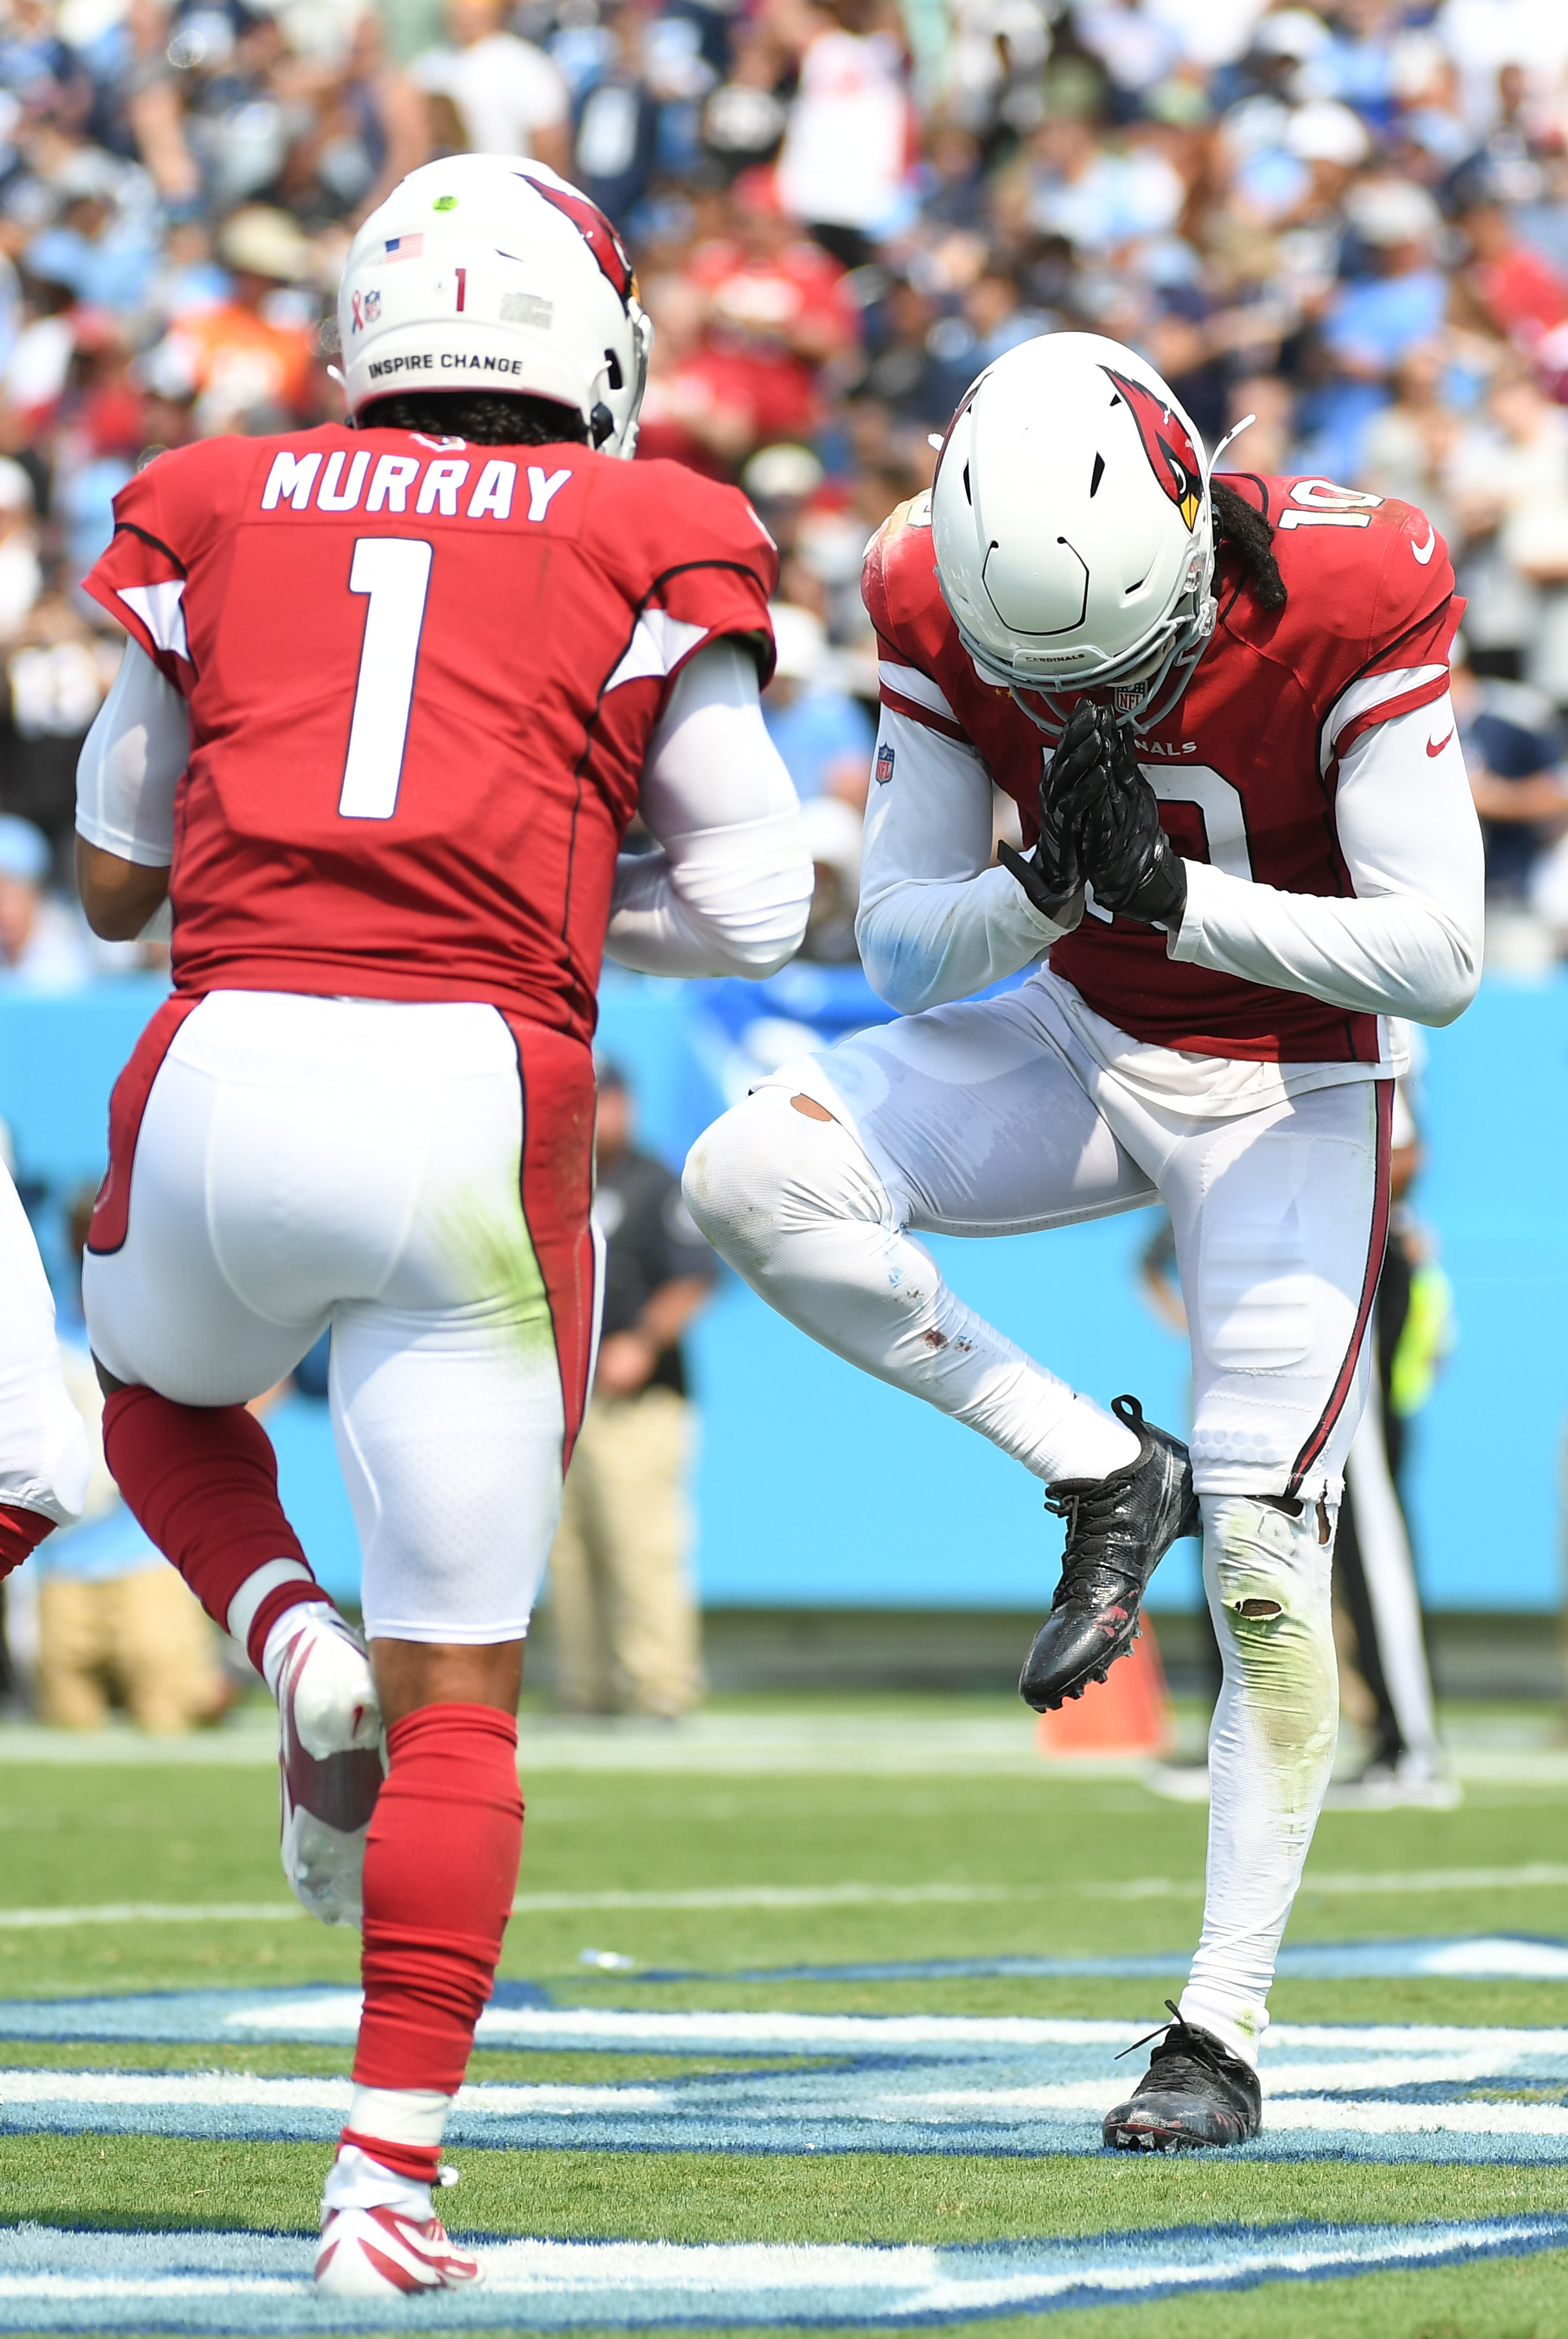 Too little, too late: Cards already showed hand on Kyler Murray